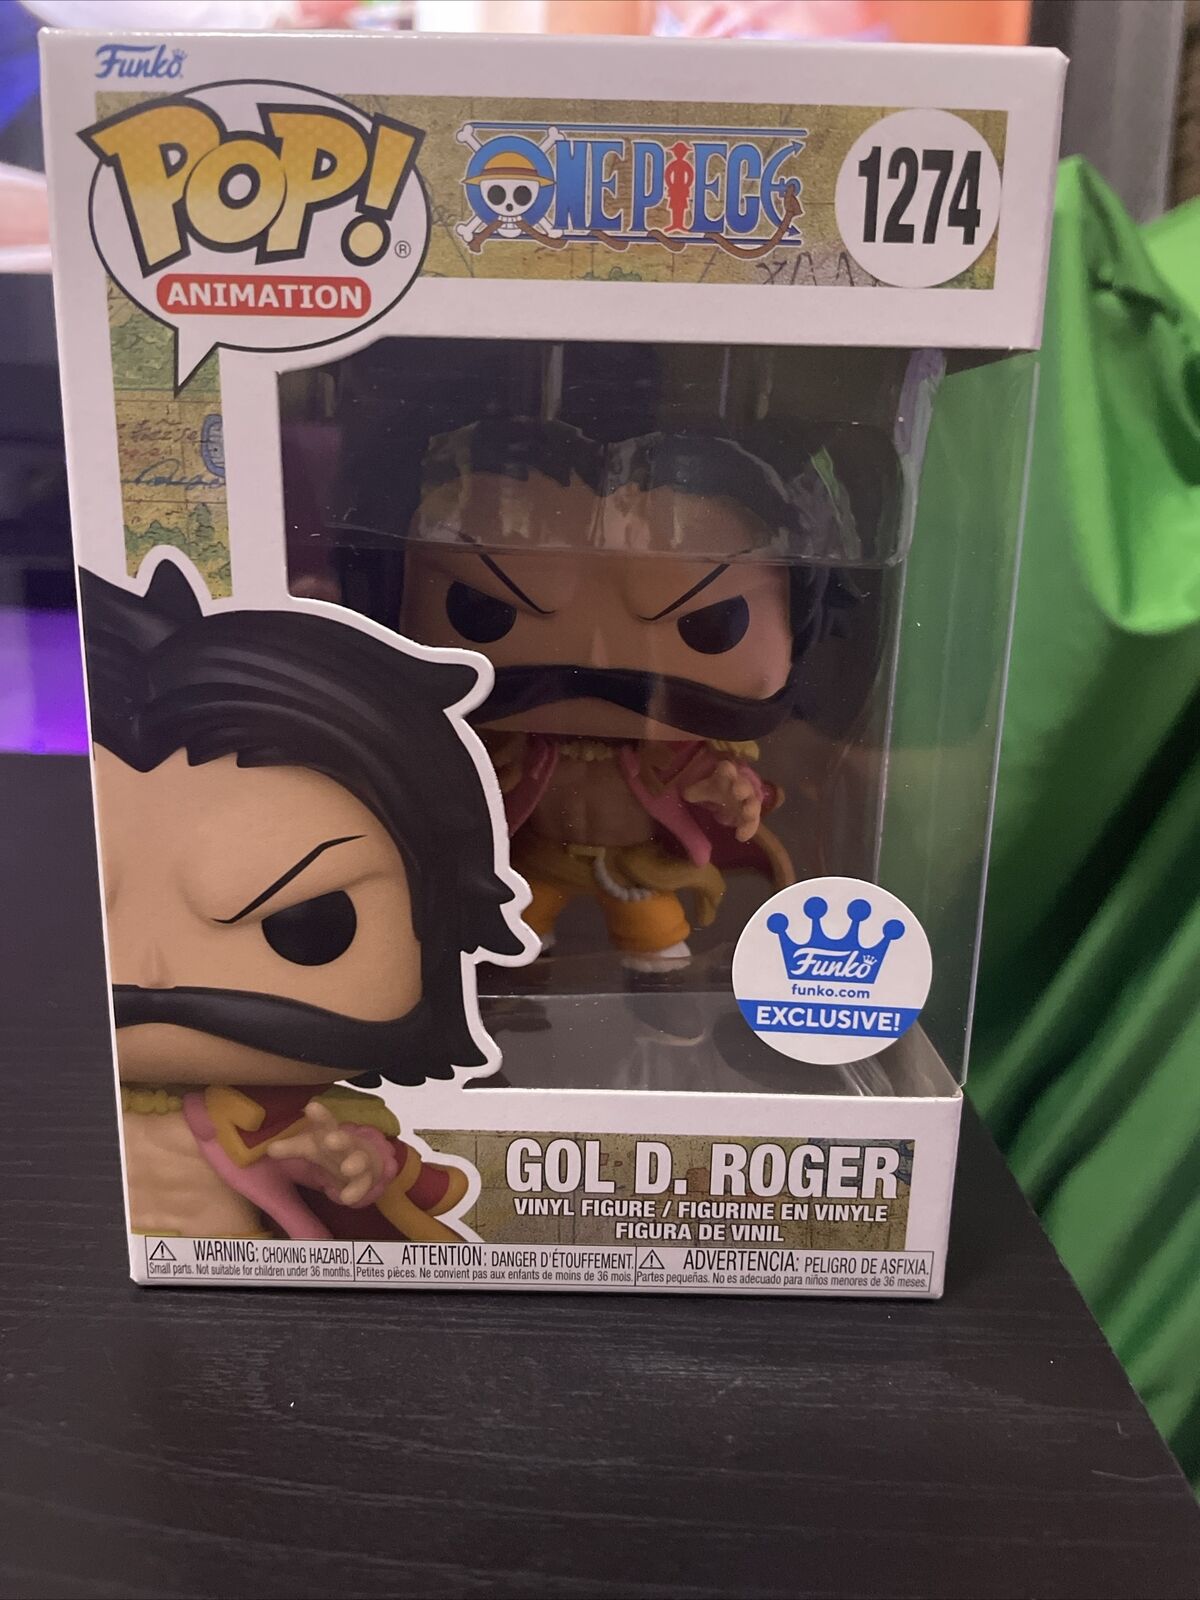 Funko Pop Animation Gol D. Roger 1274 Exclusive